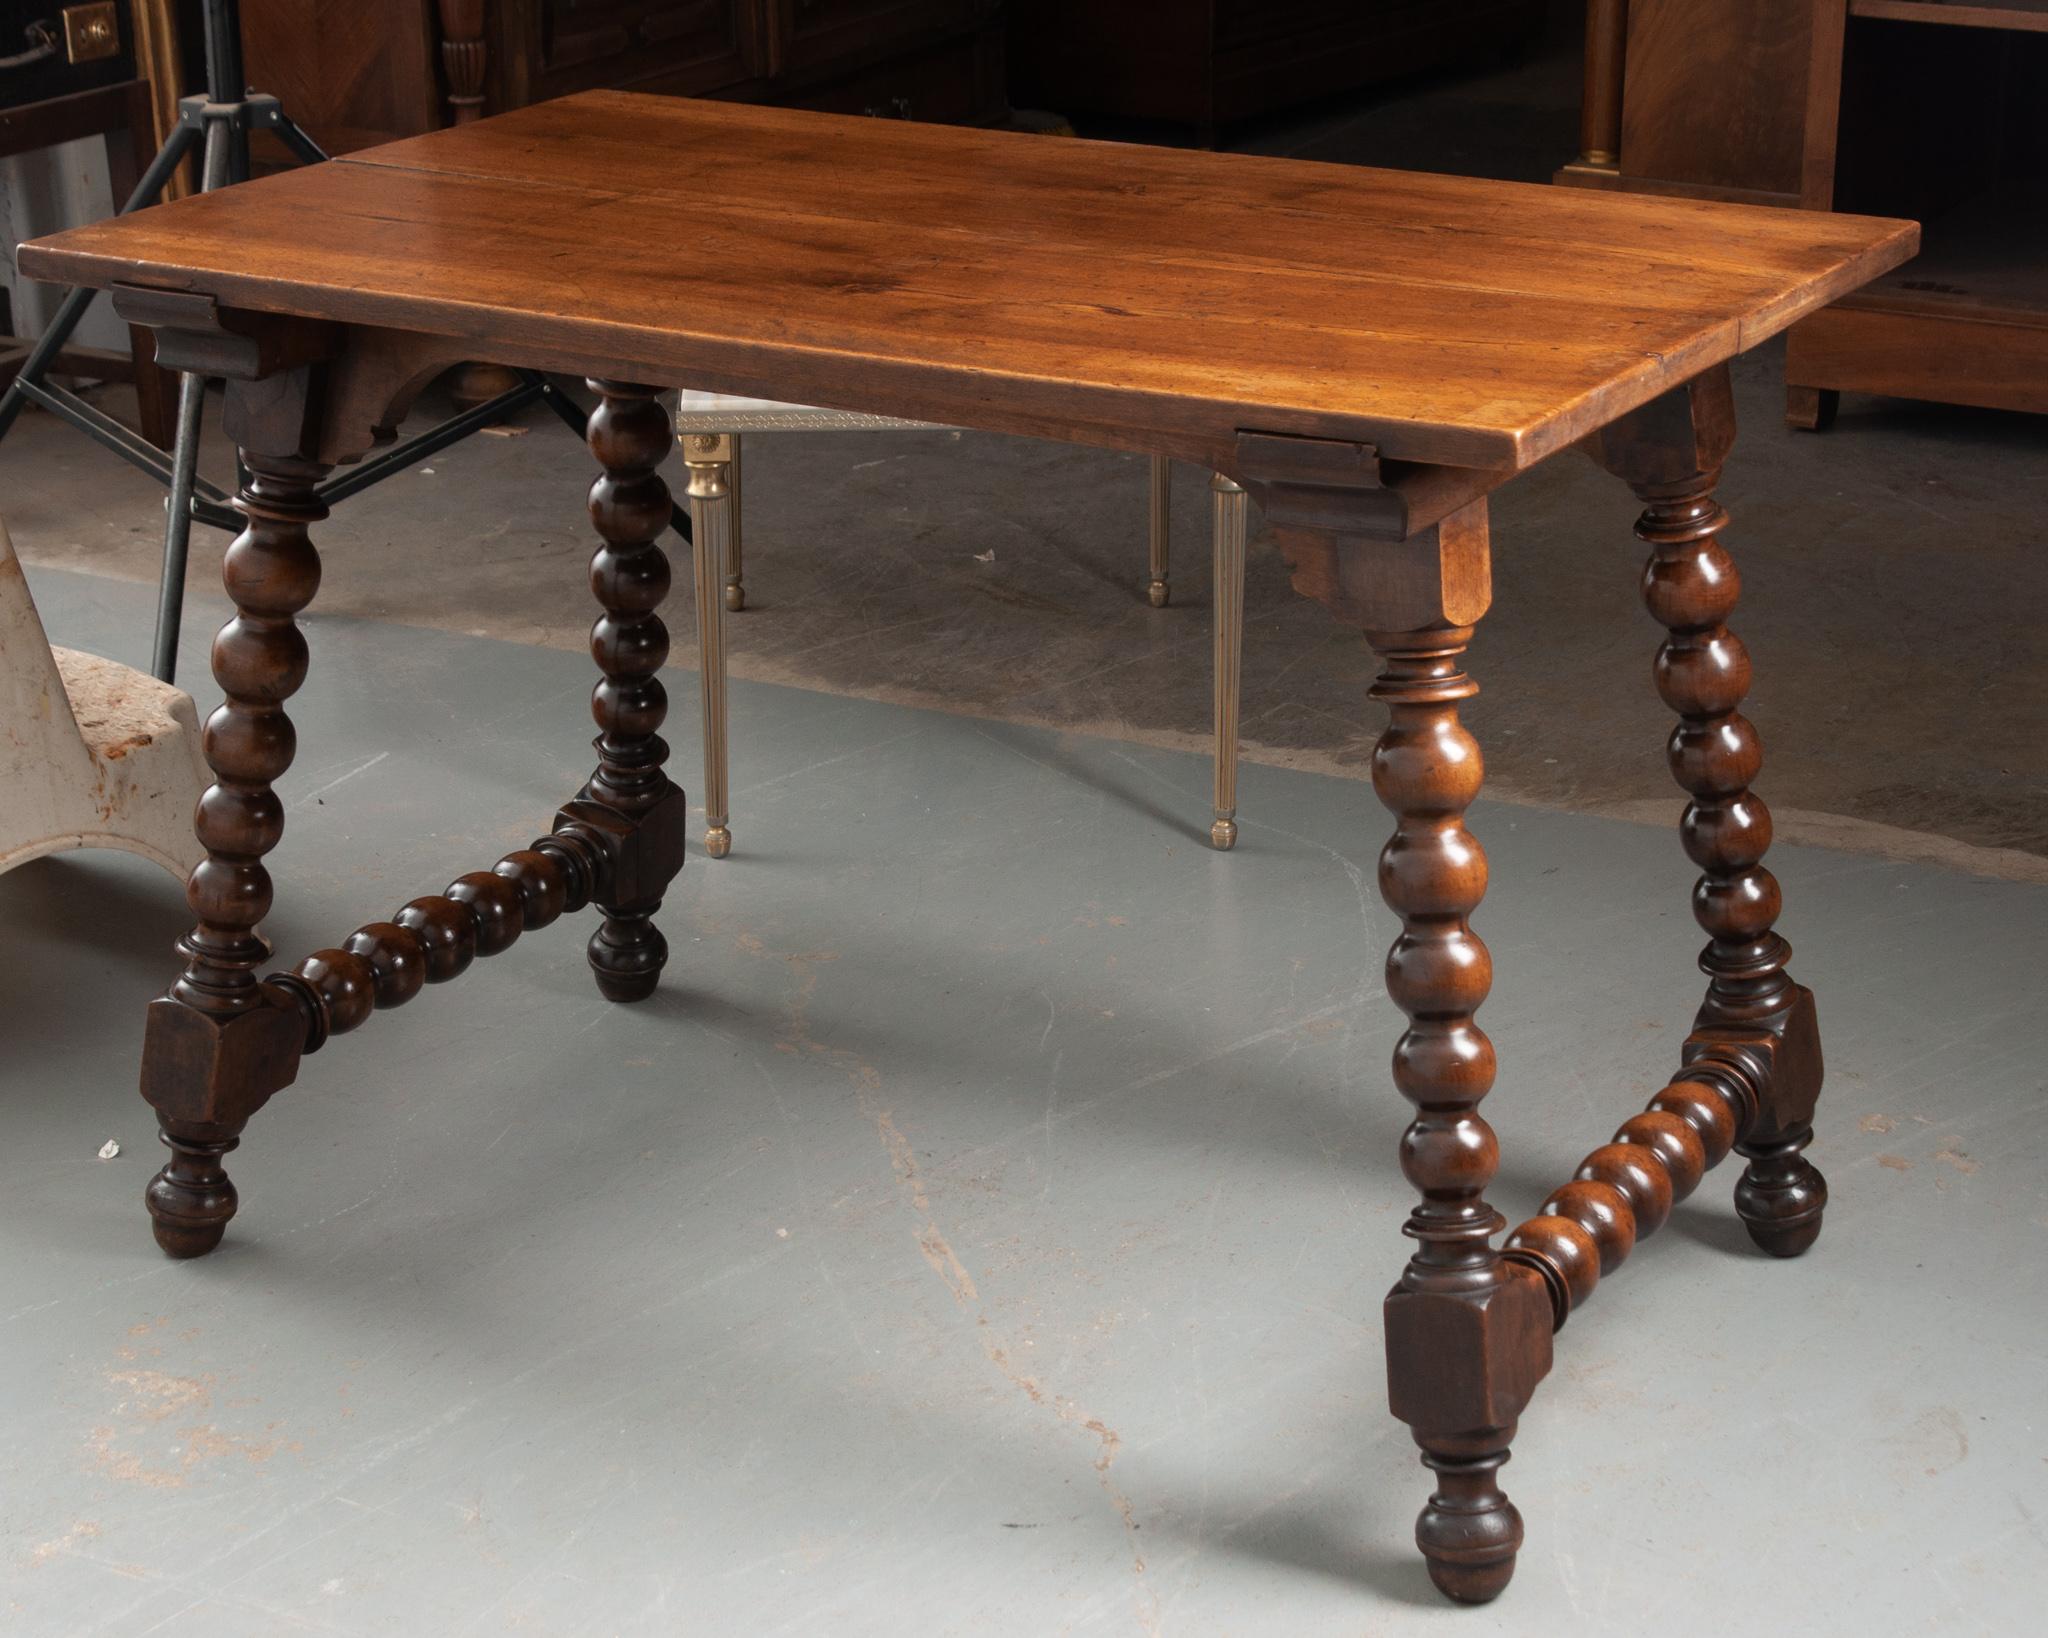 A handsome solid walnut table from 19th century France. The sturdy top is constructed of two wide bordes, connecting to a simply carved apron. The Spanish influenced turned legs are the focal point of the table, rich and deeply patinated.Quality